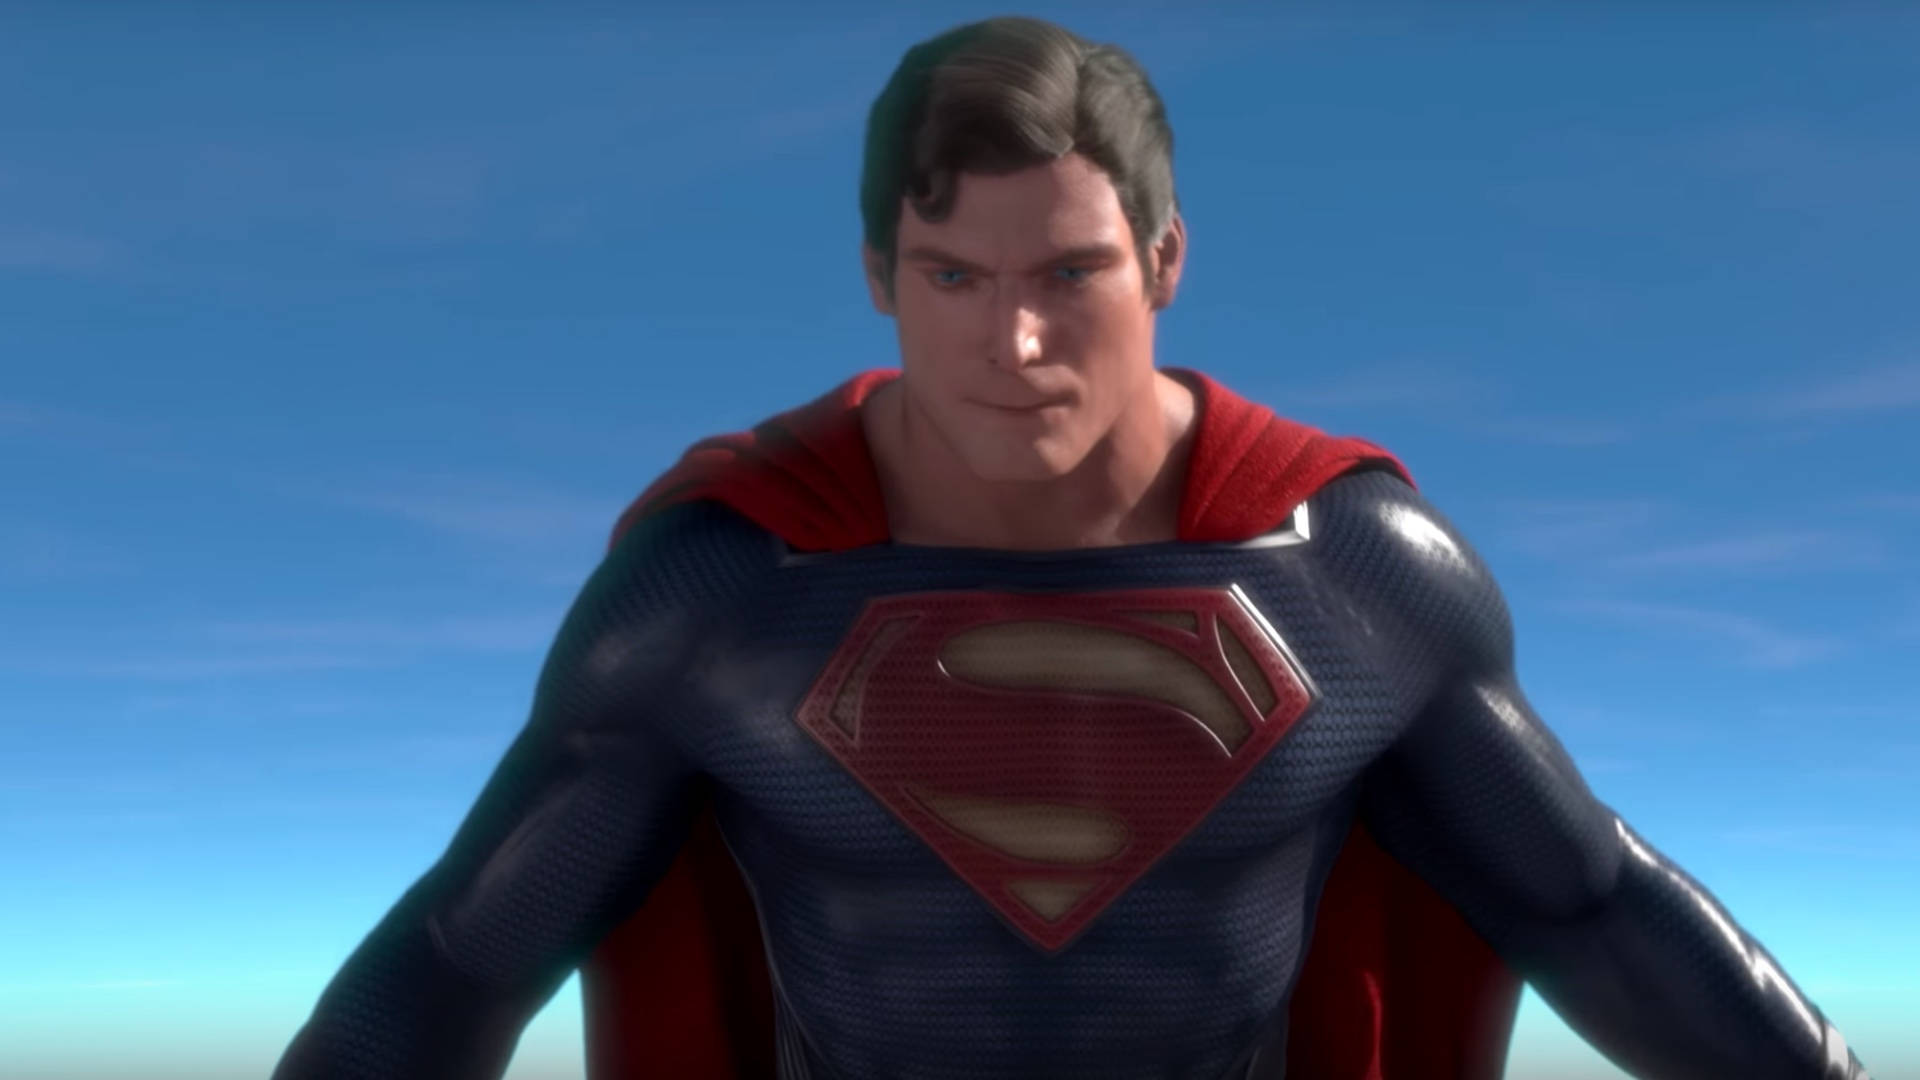 Christopher Reeve Superman Action Figure Background